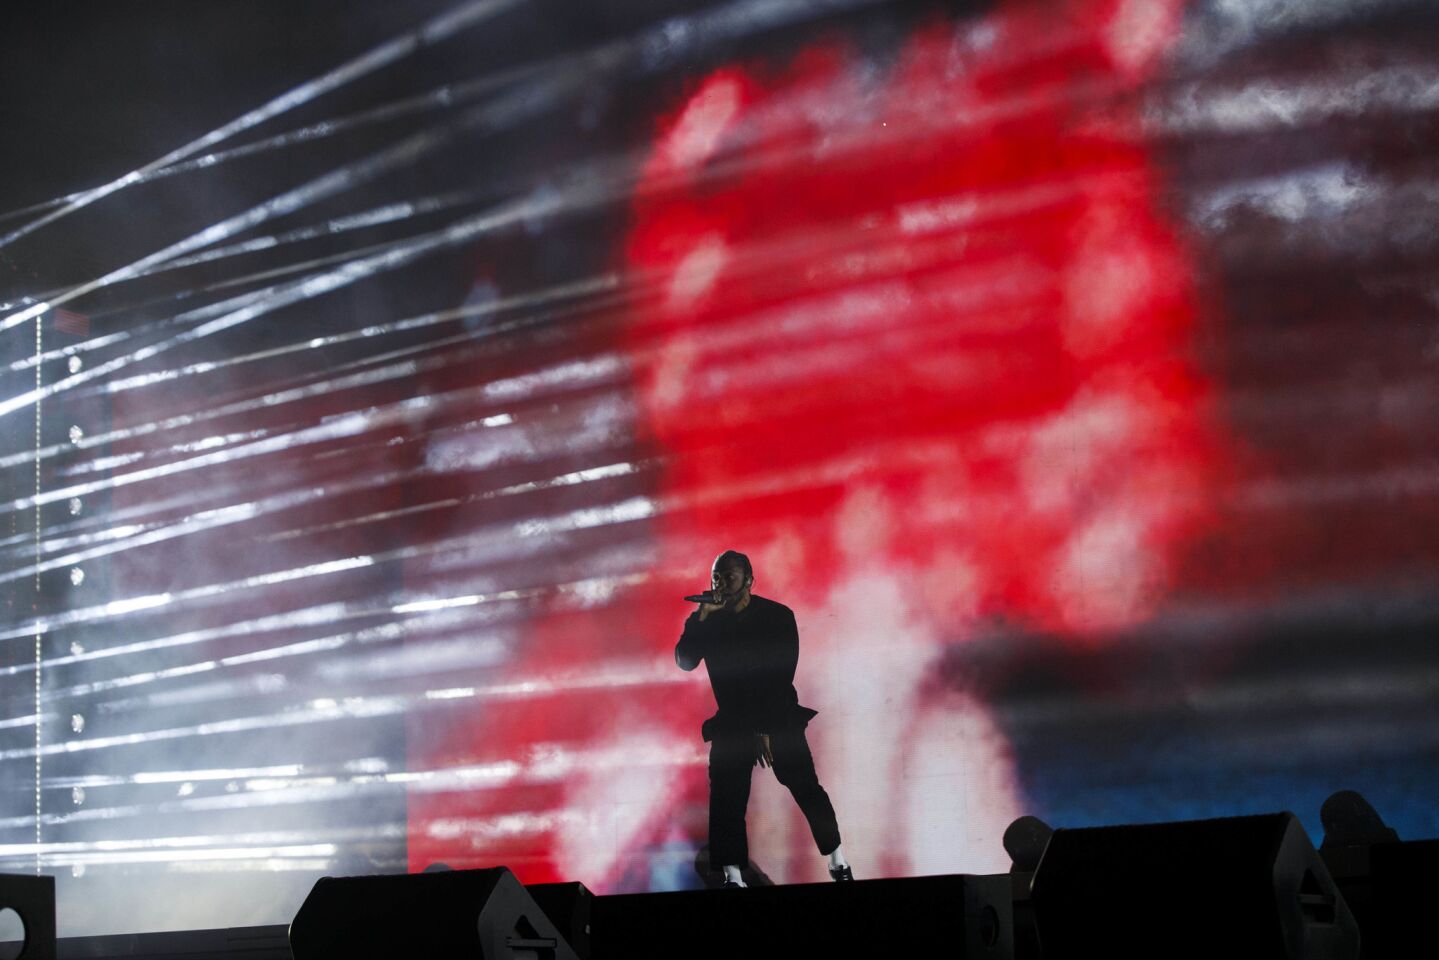 Hip-hop artist Kendrick Lamar performs during weekend one of the three-day Coachella Valley Music and Arts Festival at the Empire Polo Grounds on Sunday, April 16, 2017 in Indio, Calif. (Patrick T. Fallon/ For The Los Angeles Times)